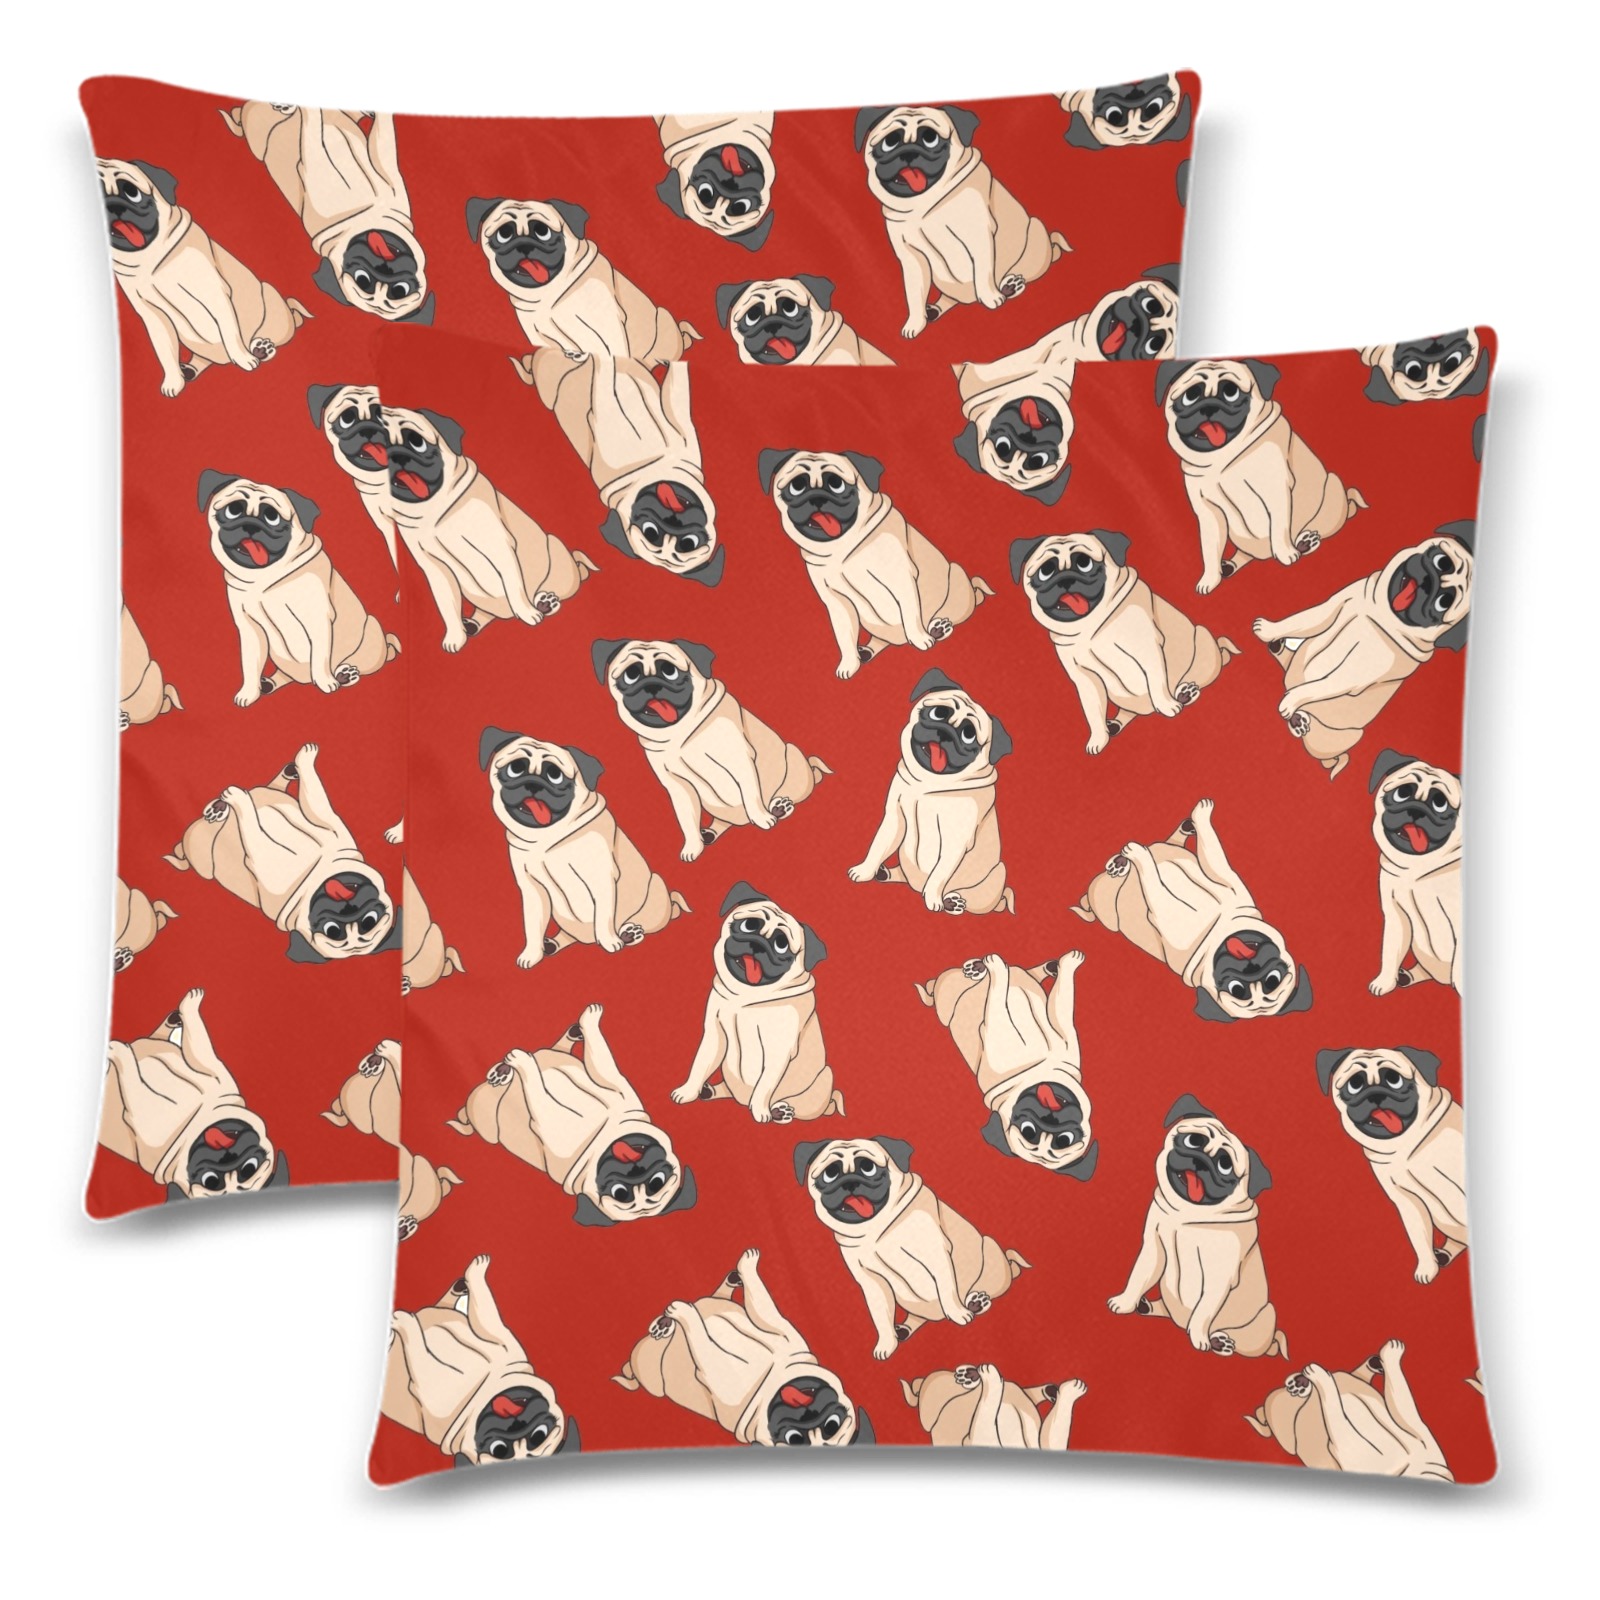 Pugs on Red Custom Zippered Pillow Cases 18"x 18" (Twin Sides) (Set of 2)